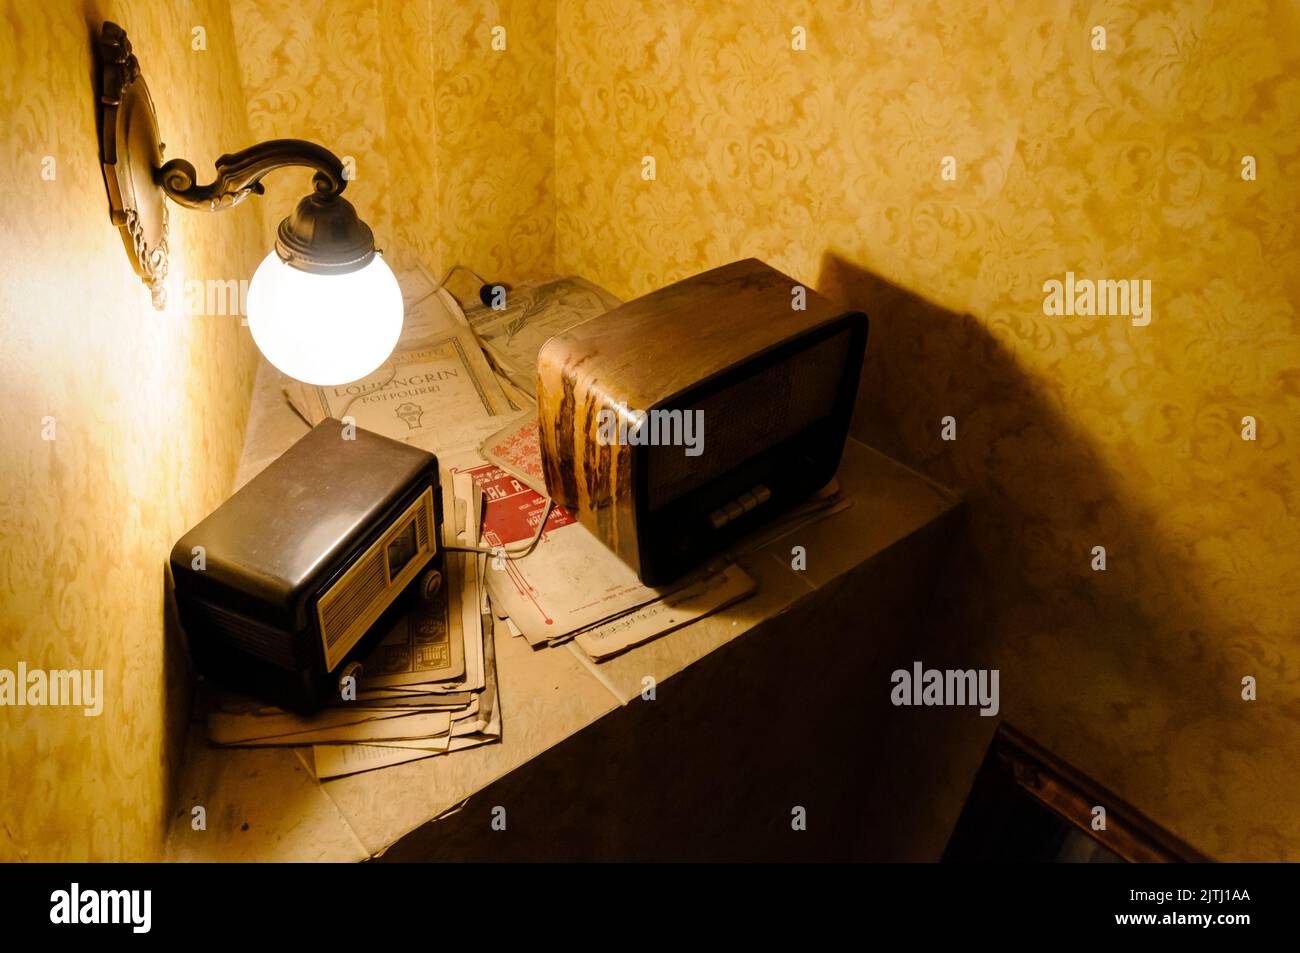 Two old radios in the corner of a room with sheet music. Stock Photo